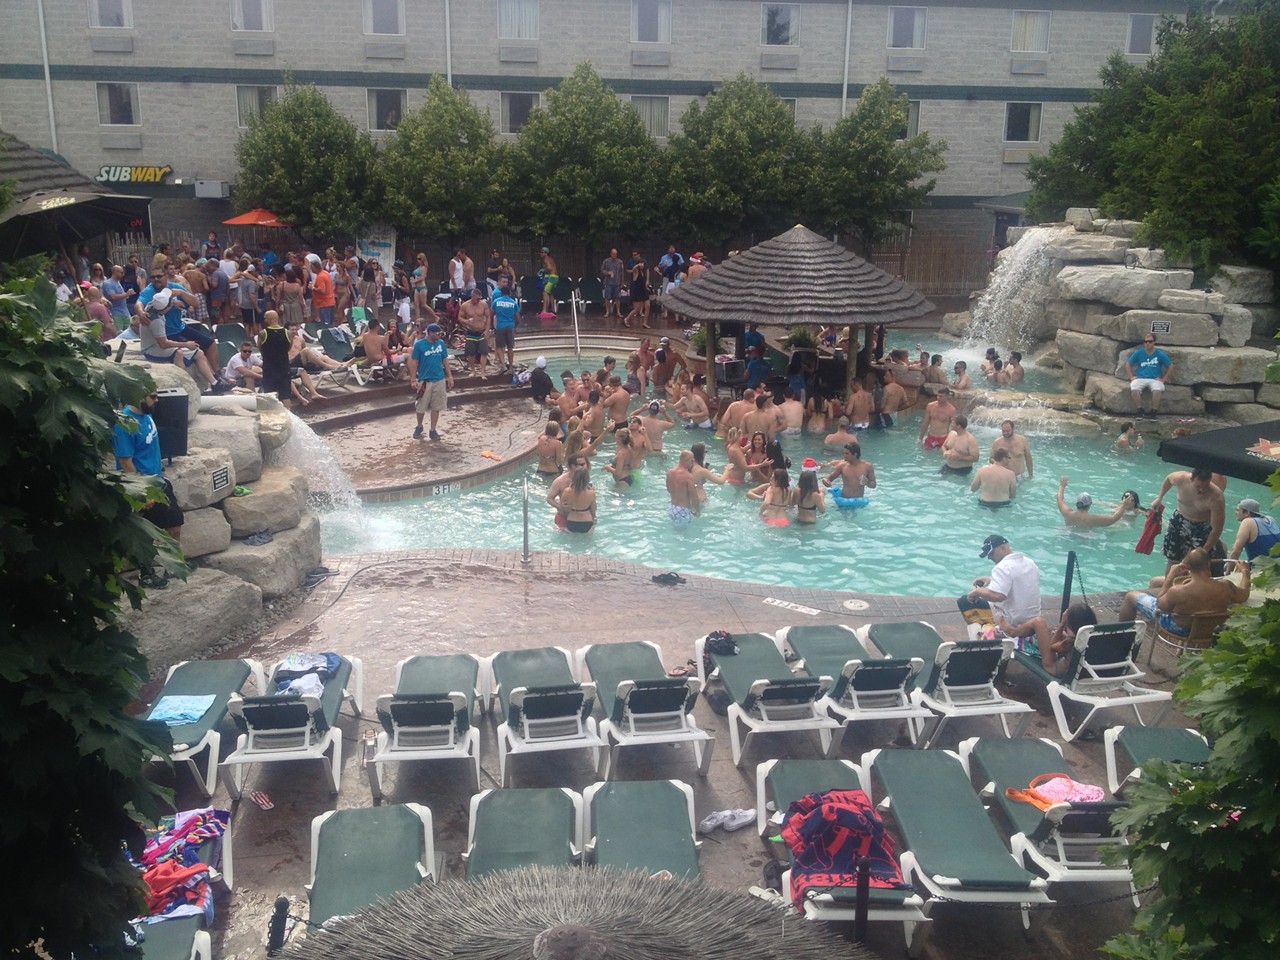 The pool bar with several reported druggings this summer